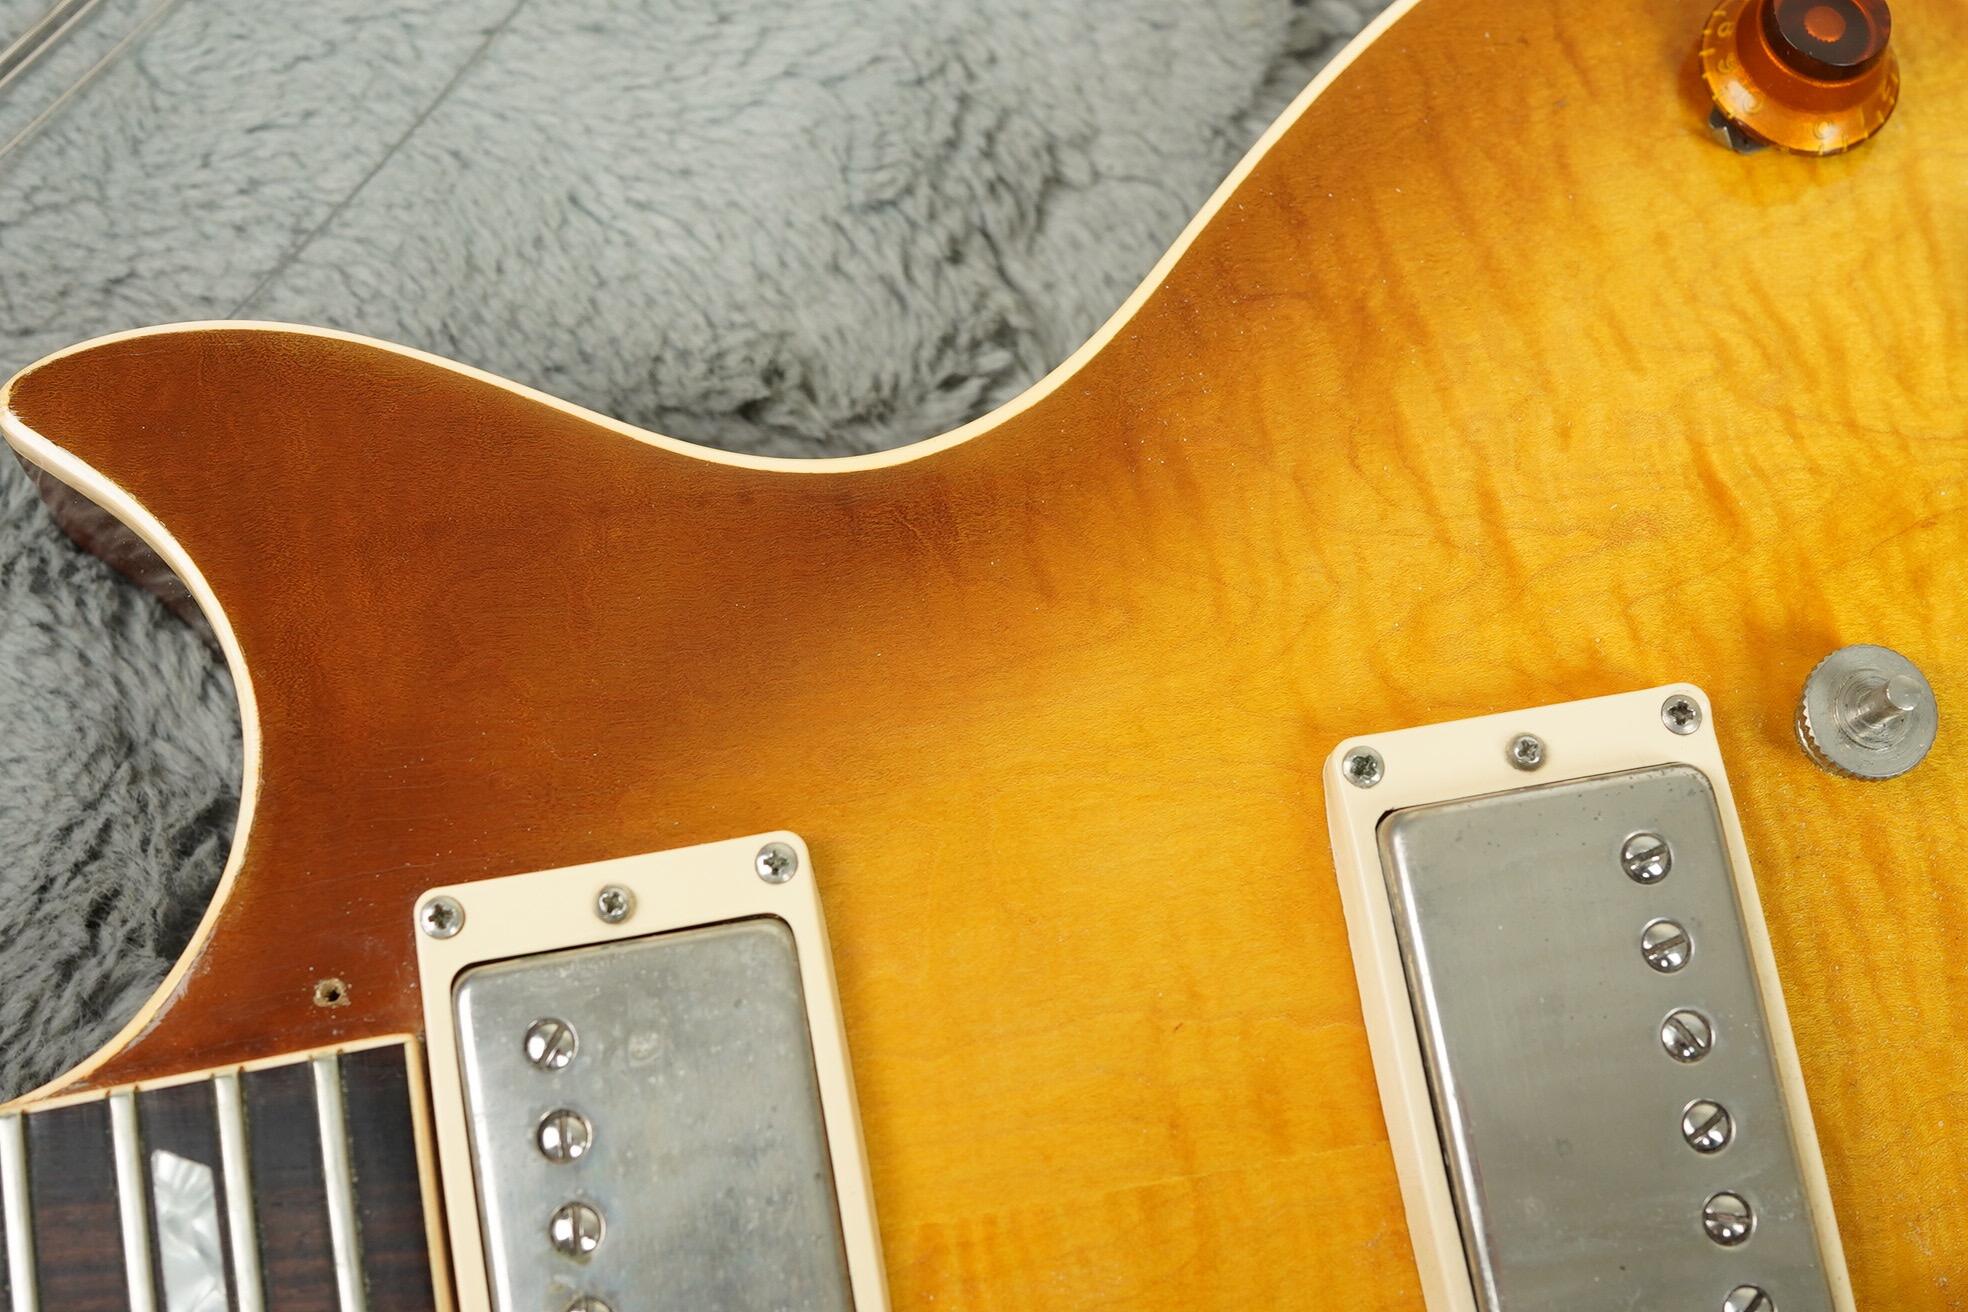 1981 Gibson Les Paul Heritage 80